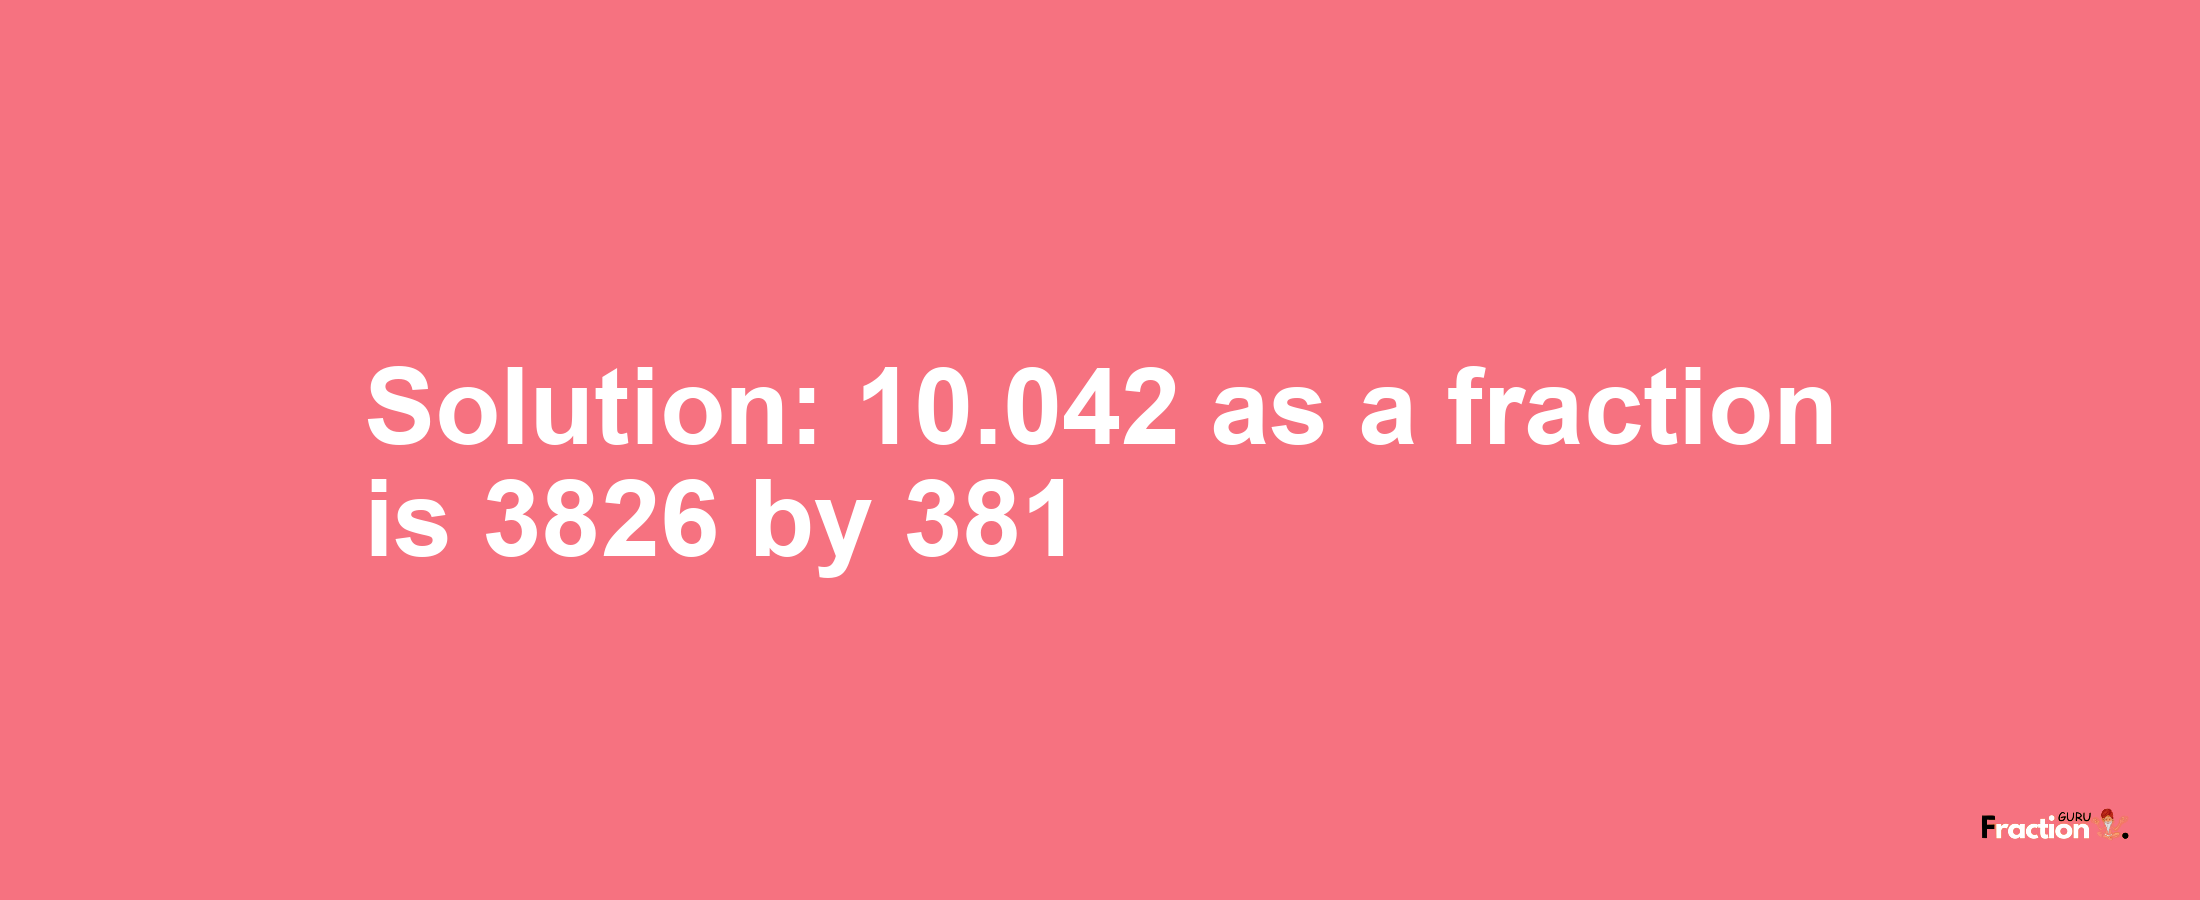 Solution:10.042 as a fraction is 3826/381